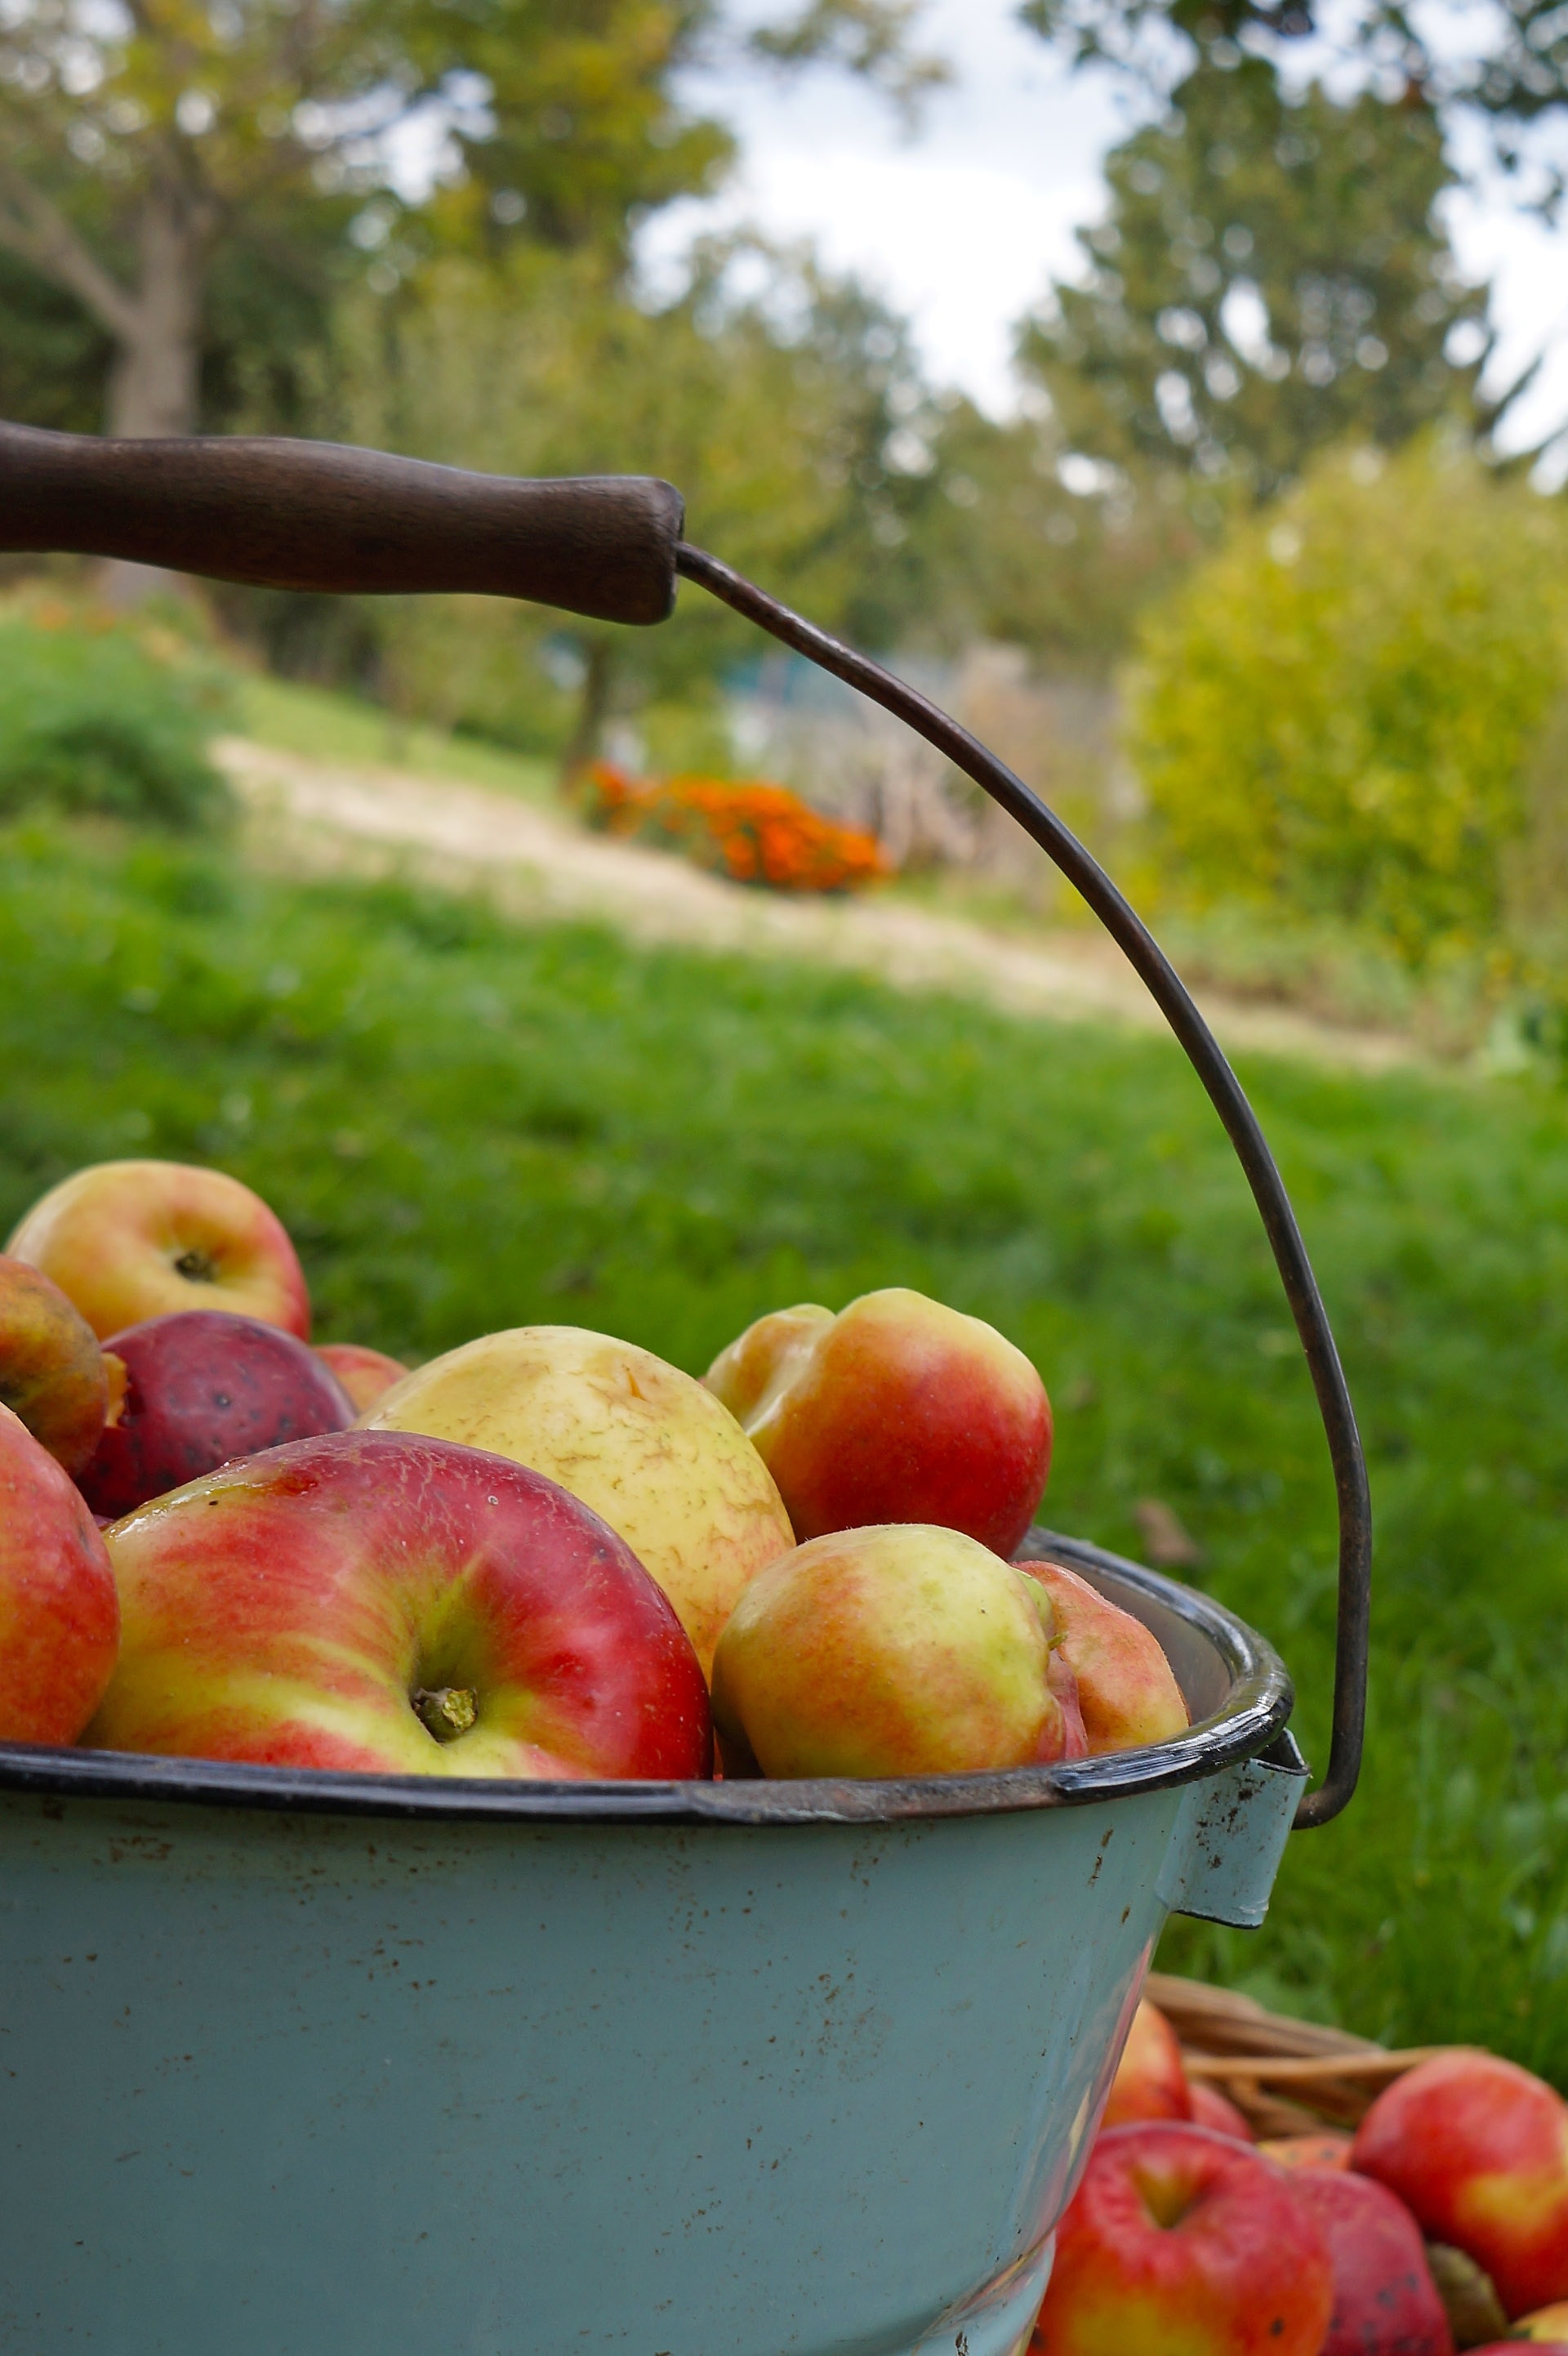 Bucket, Apples Are Harvested By, Apple, fruit, food and drink